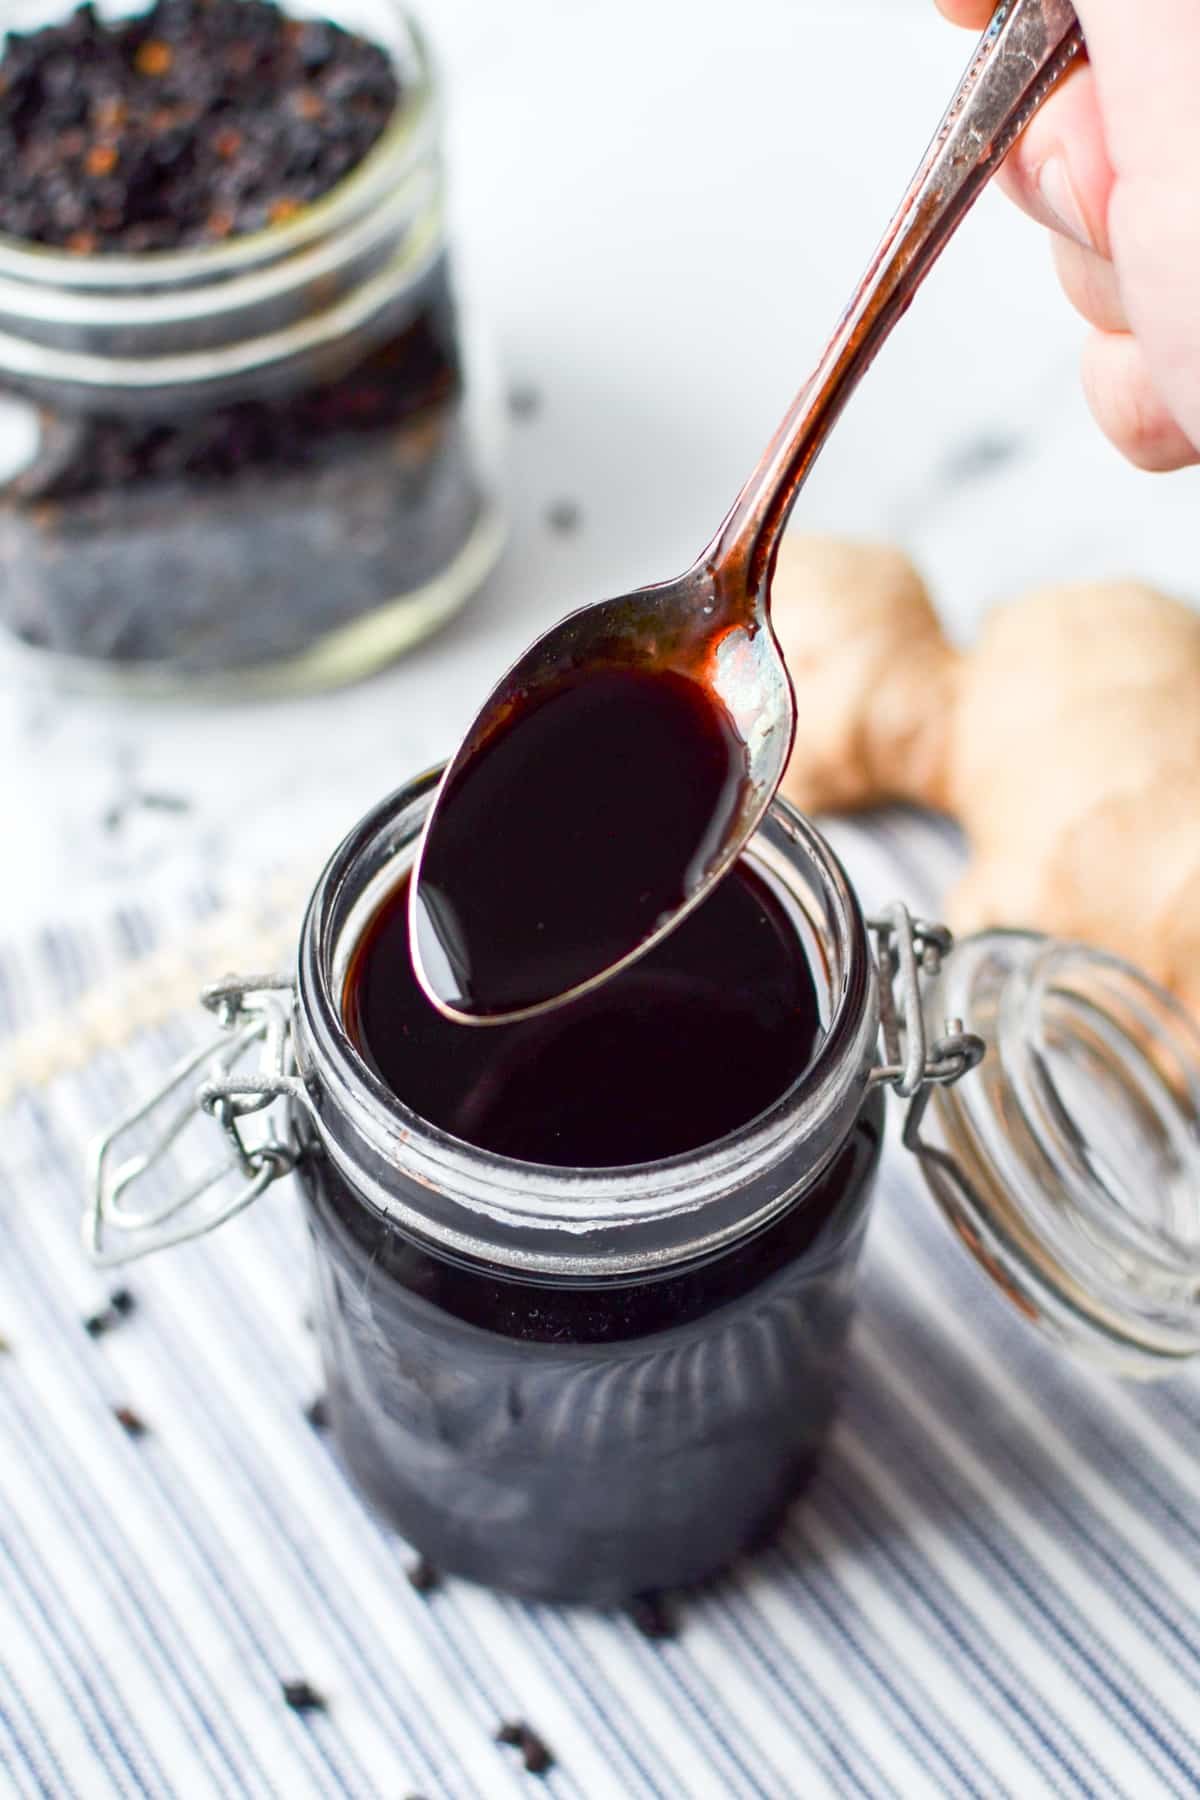 A spoon being taken from a jar of elderberry syrup.